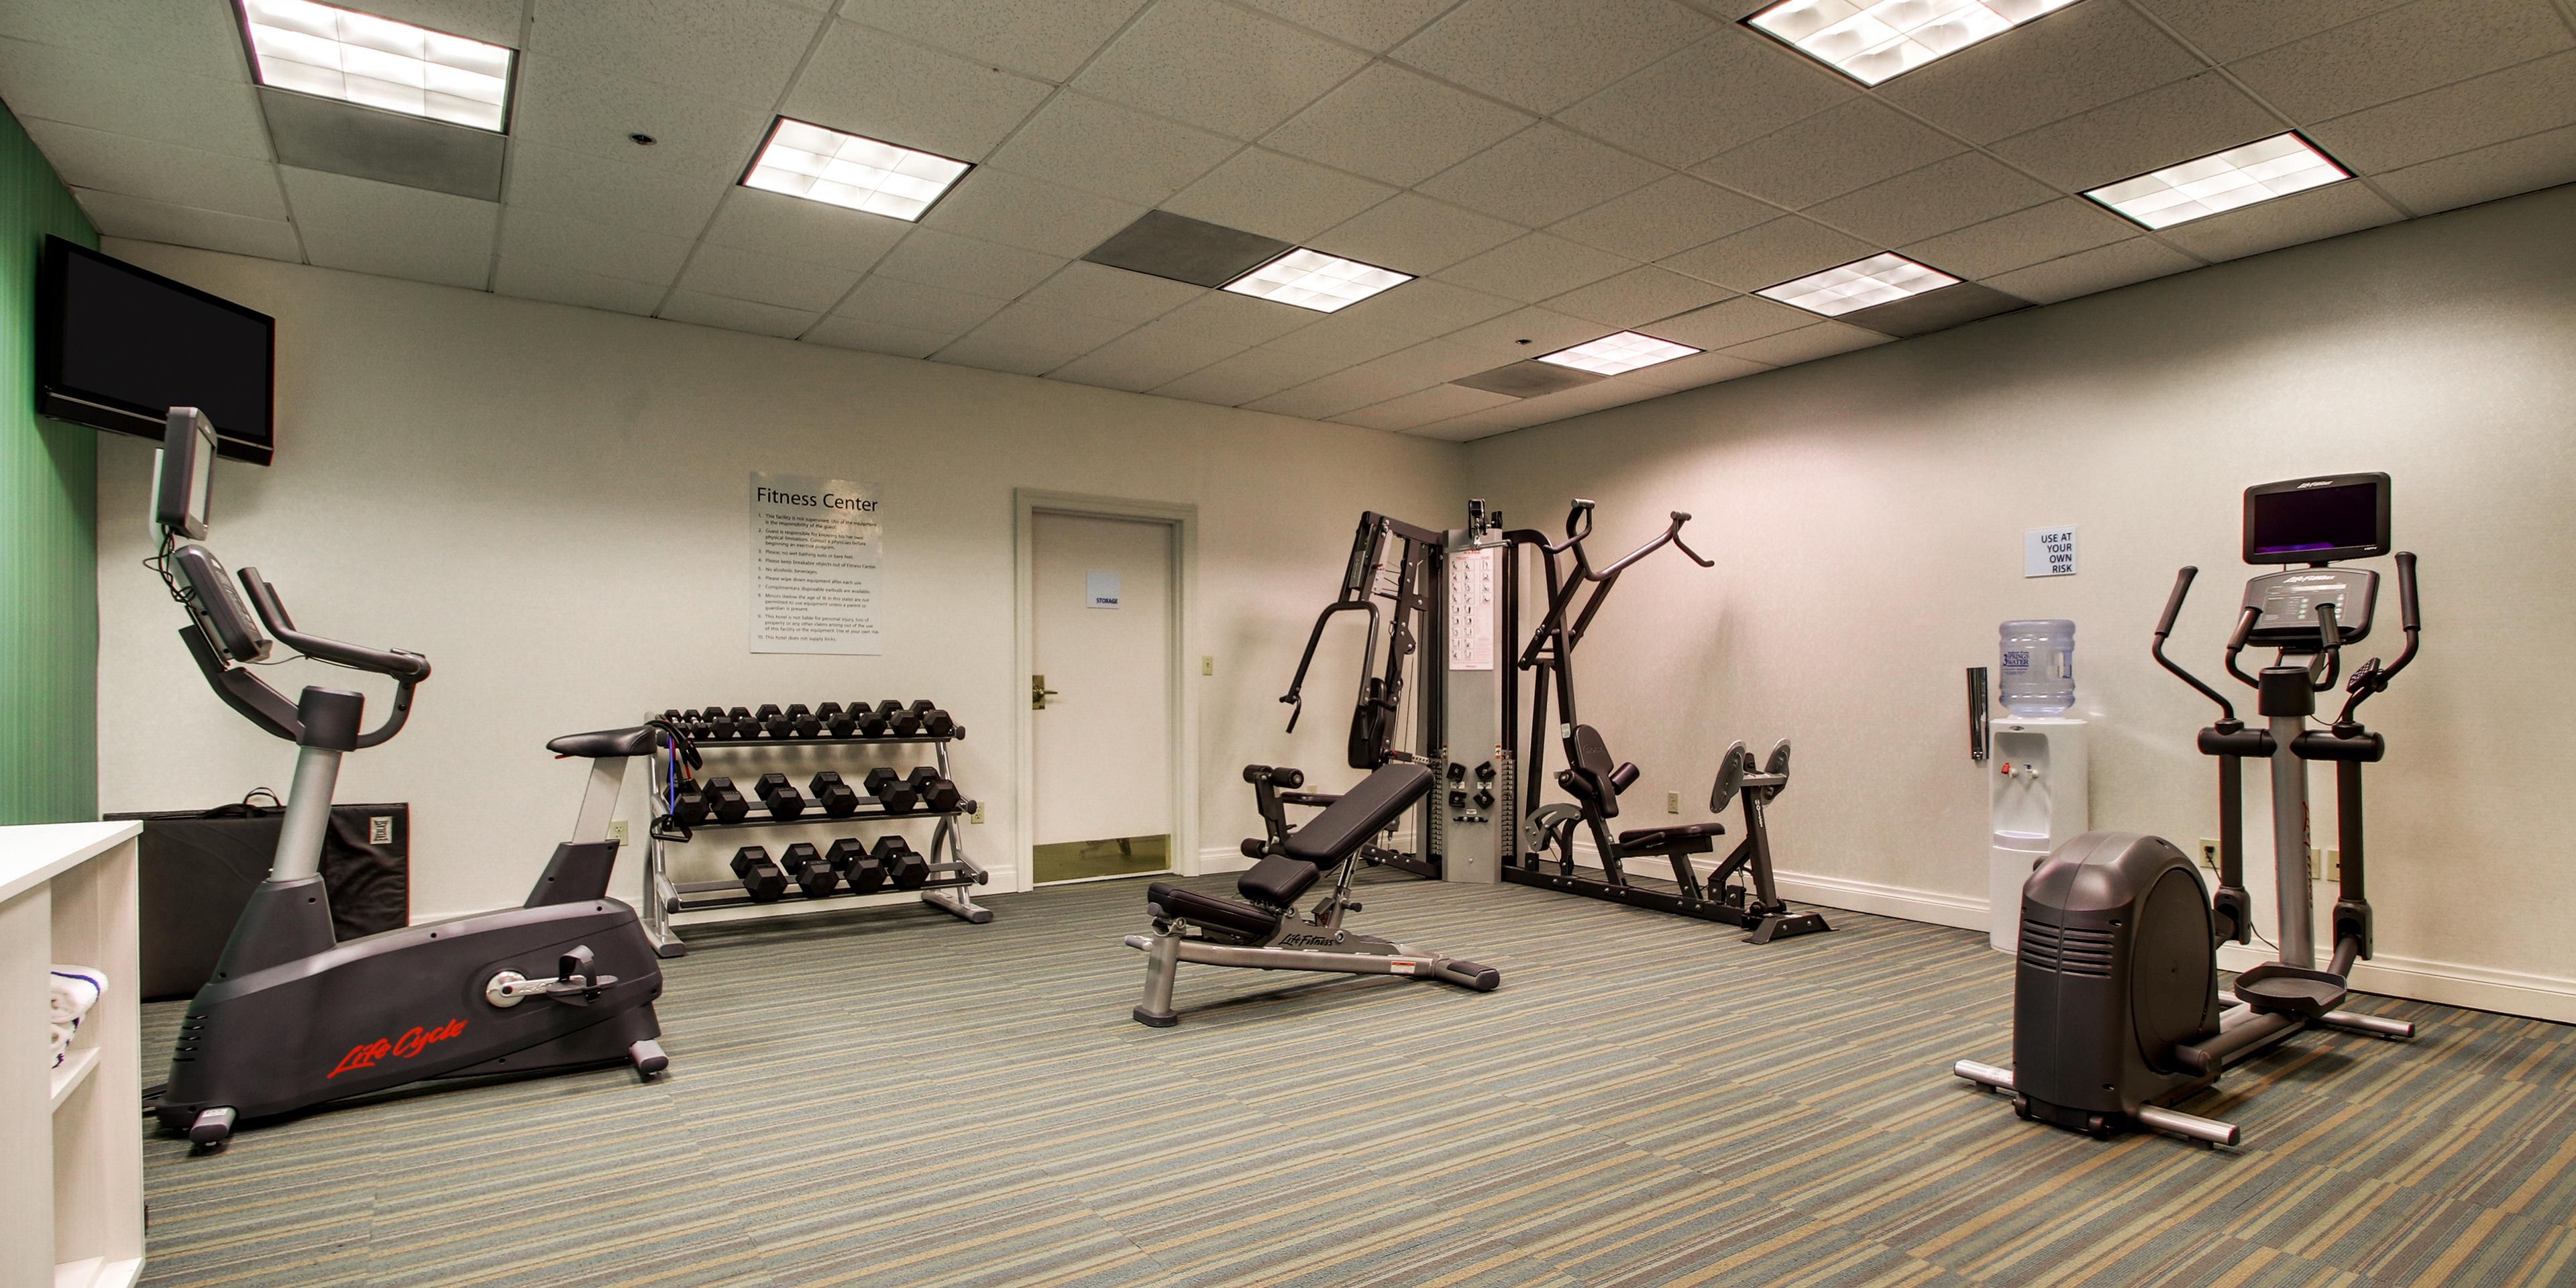 The Fitness Center at the Holiday Inn Express Poughkeepsie hotel features a treadmill, elliptical, recumbent bicycle, free weights ranging from 5lbs- 50lbs, bosu and balance ball, and yoga mats.

Hours of Operation: 6:00 AM to 11:00 PM